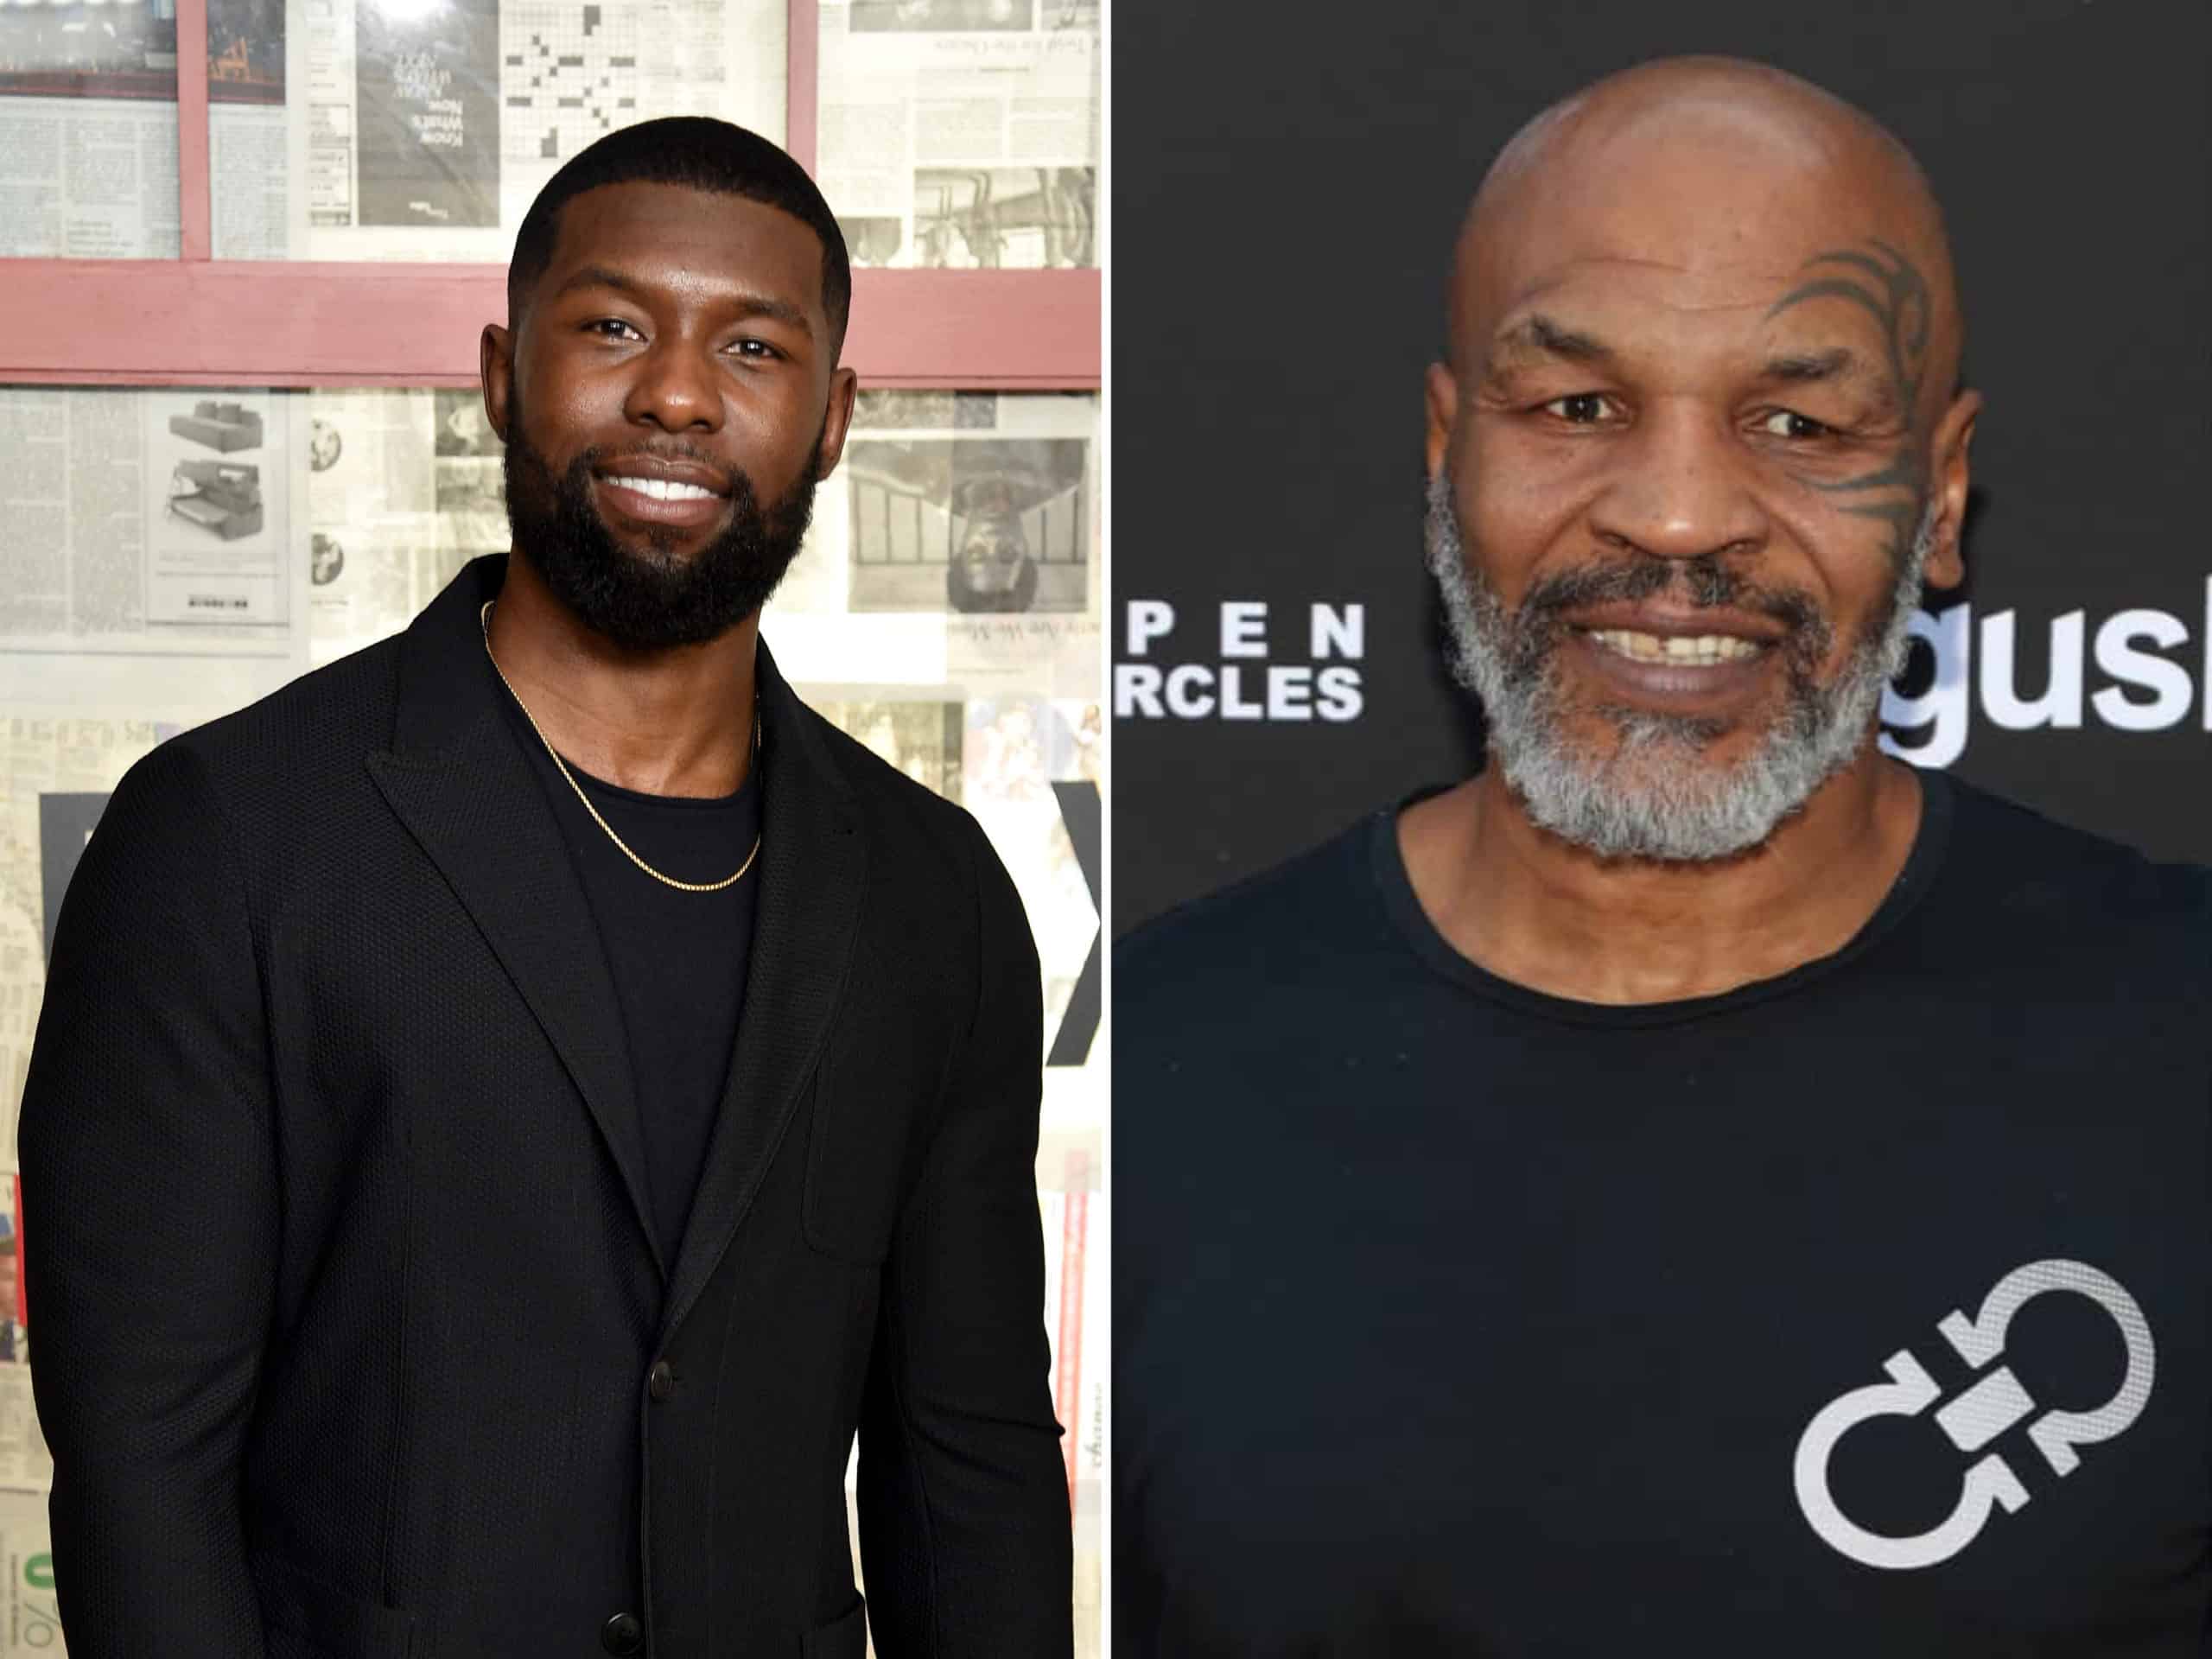 Trevante Rhodes will be starring as Mike Tyson is Hulu's biopic series "Iron Mike," which will go into production later this year.